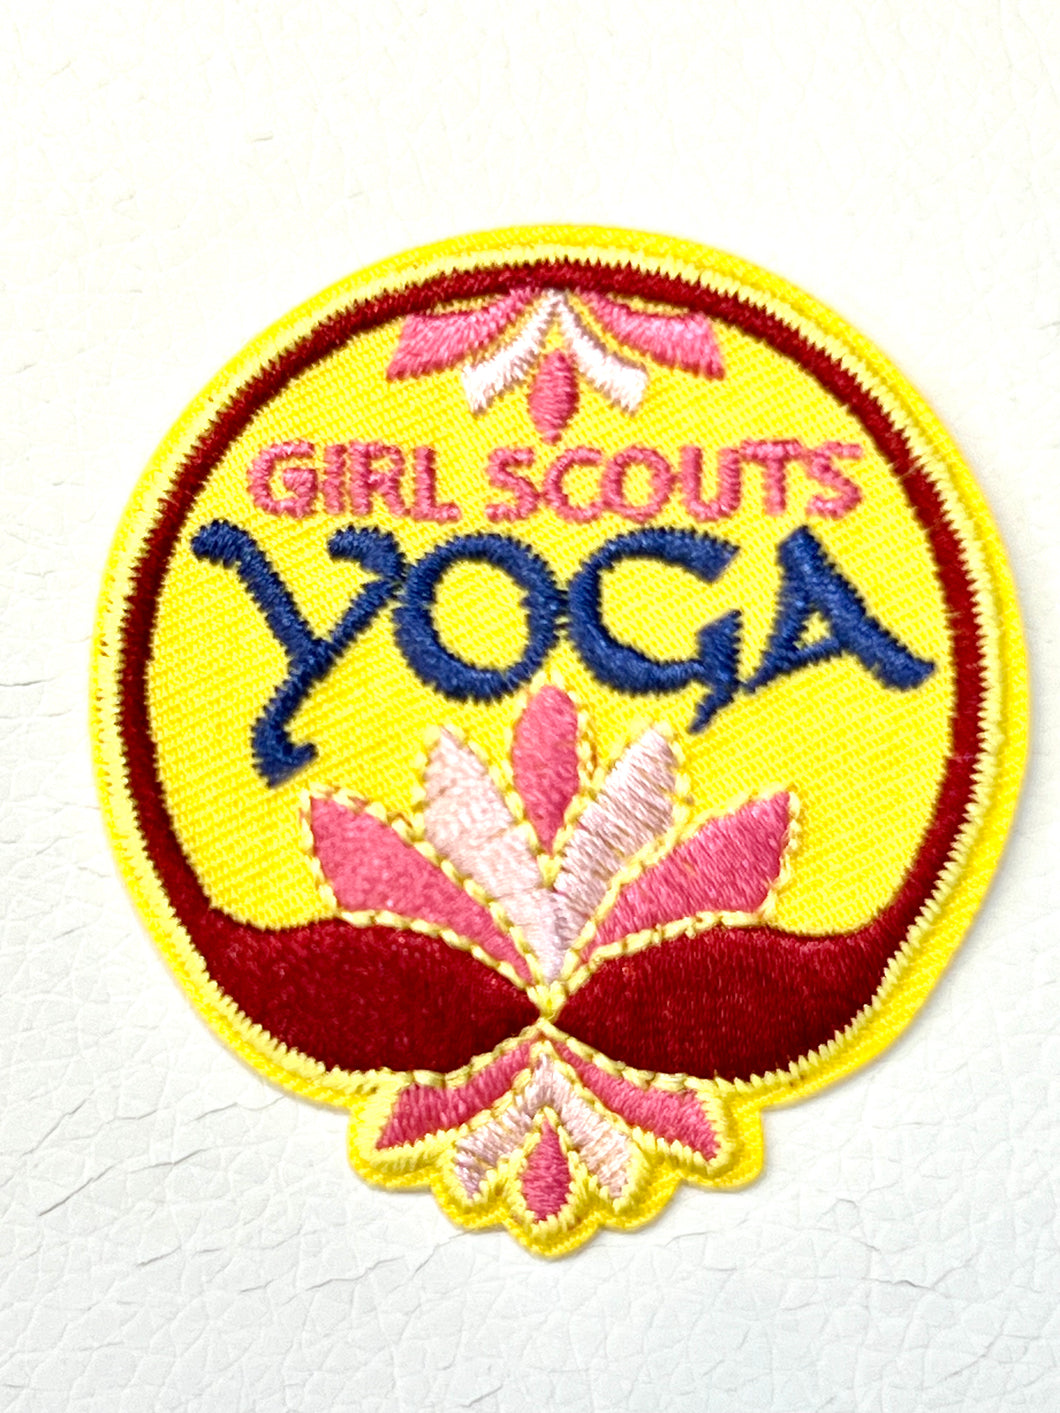 Girl Scouts yoga lotus flower patch